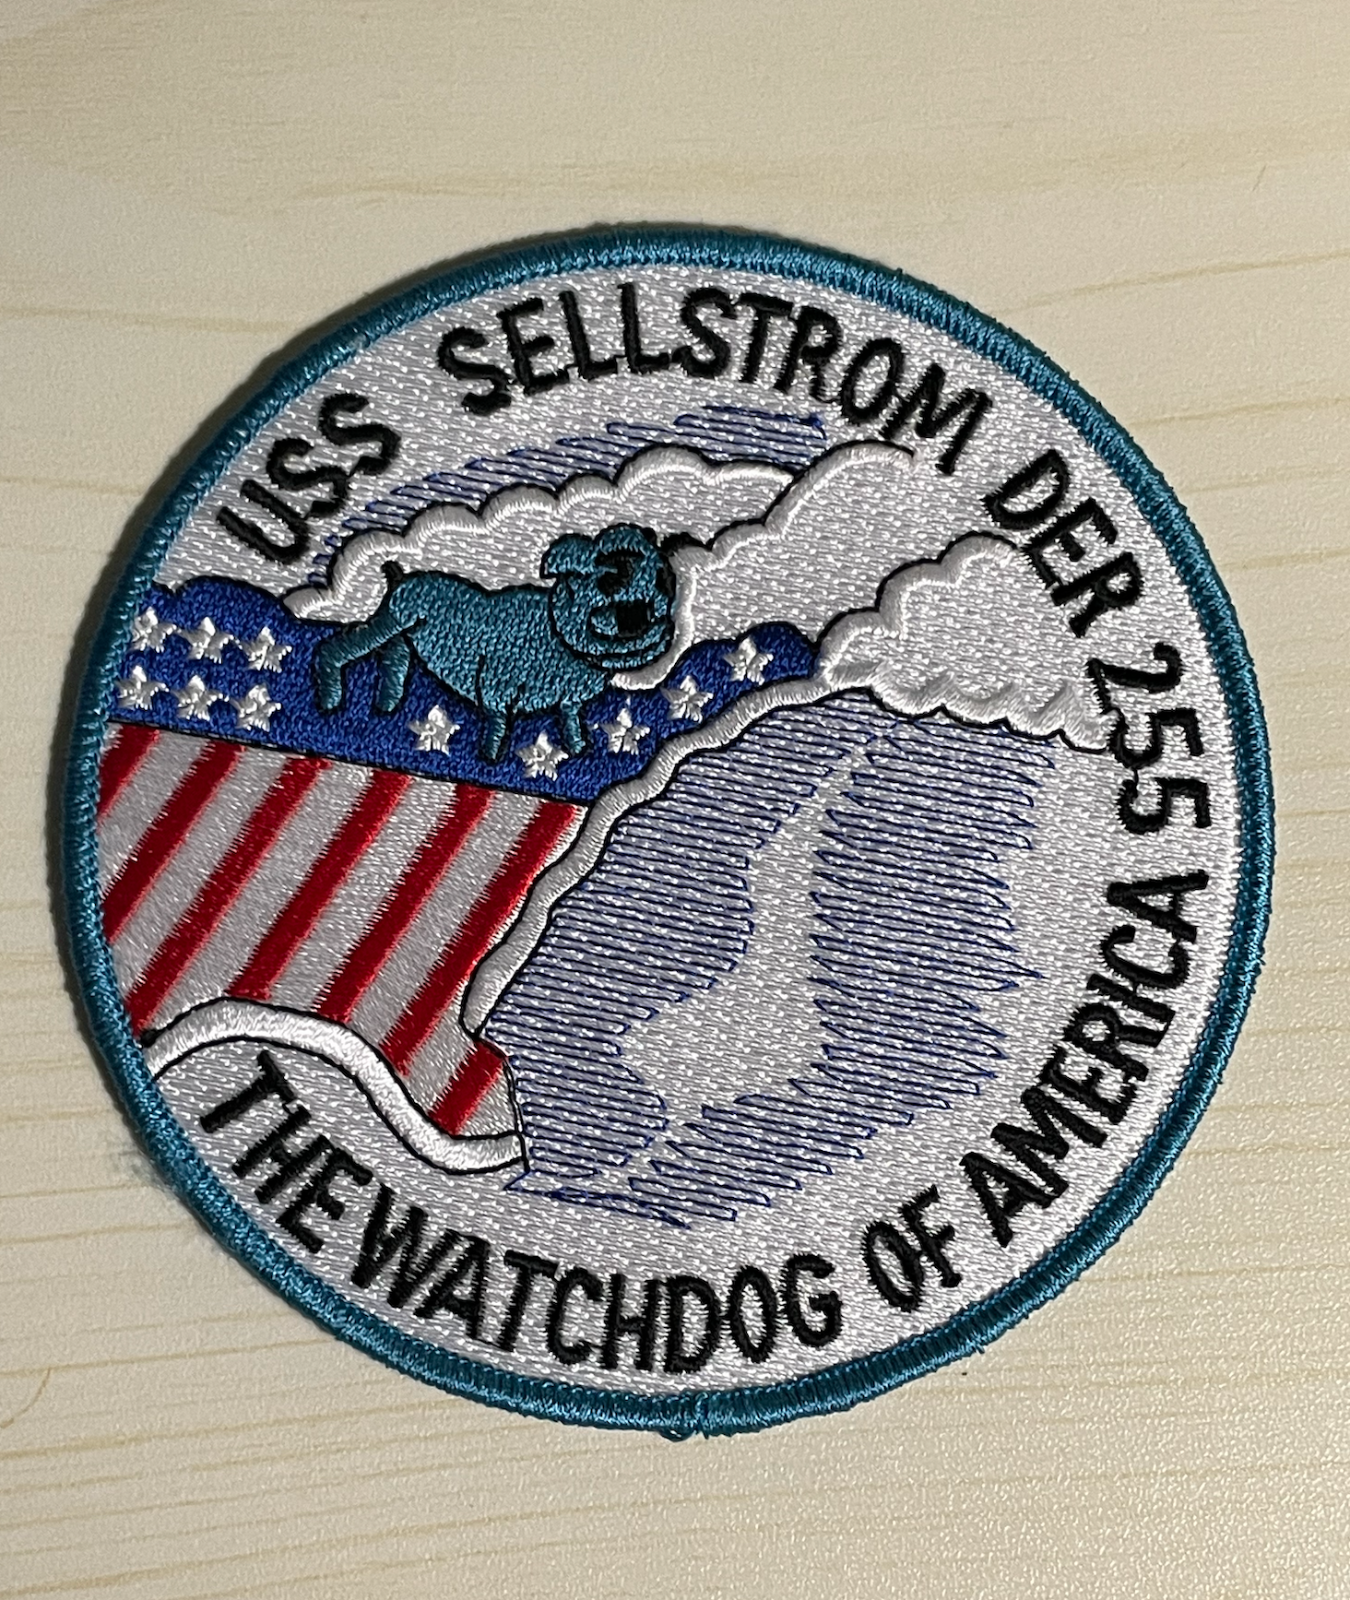 Primary image for 4.5" NAVY USS SELLSTROM DER-255 WATCHDOG AMERICA USA FLAG EMBROIDERED PATCH